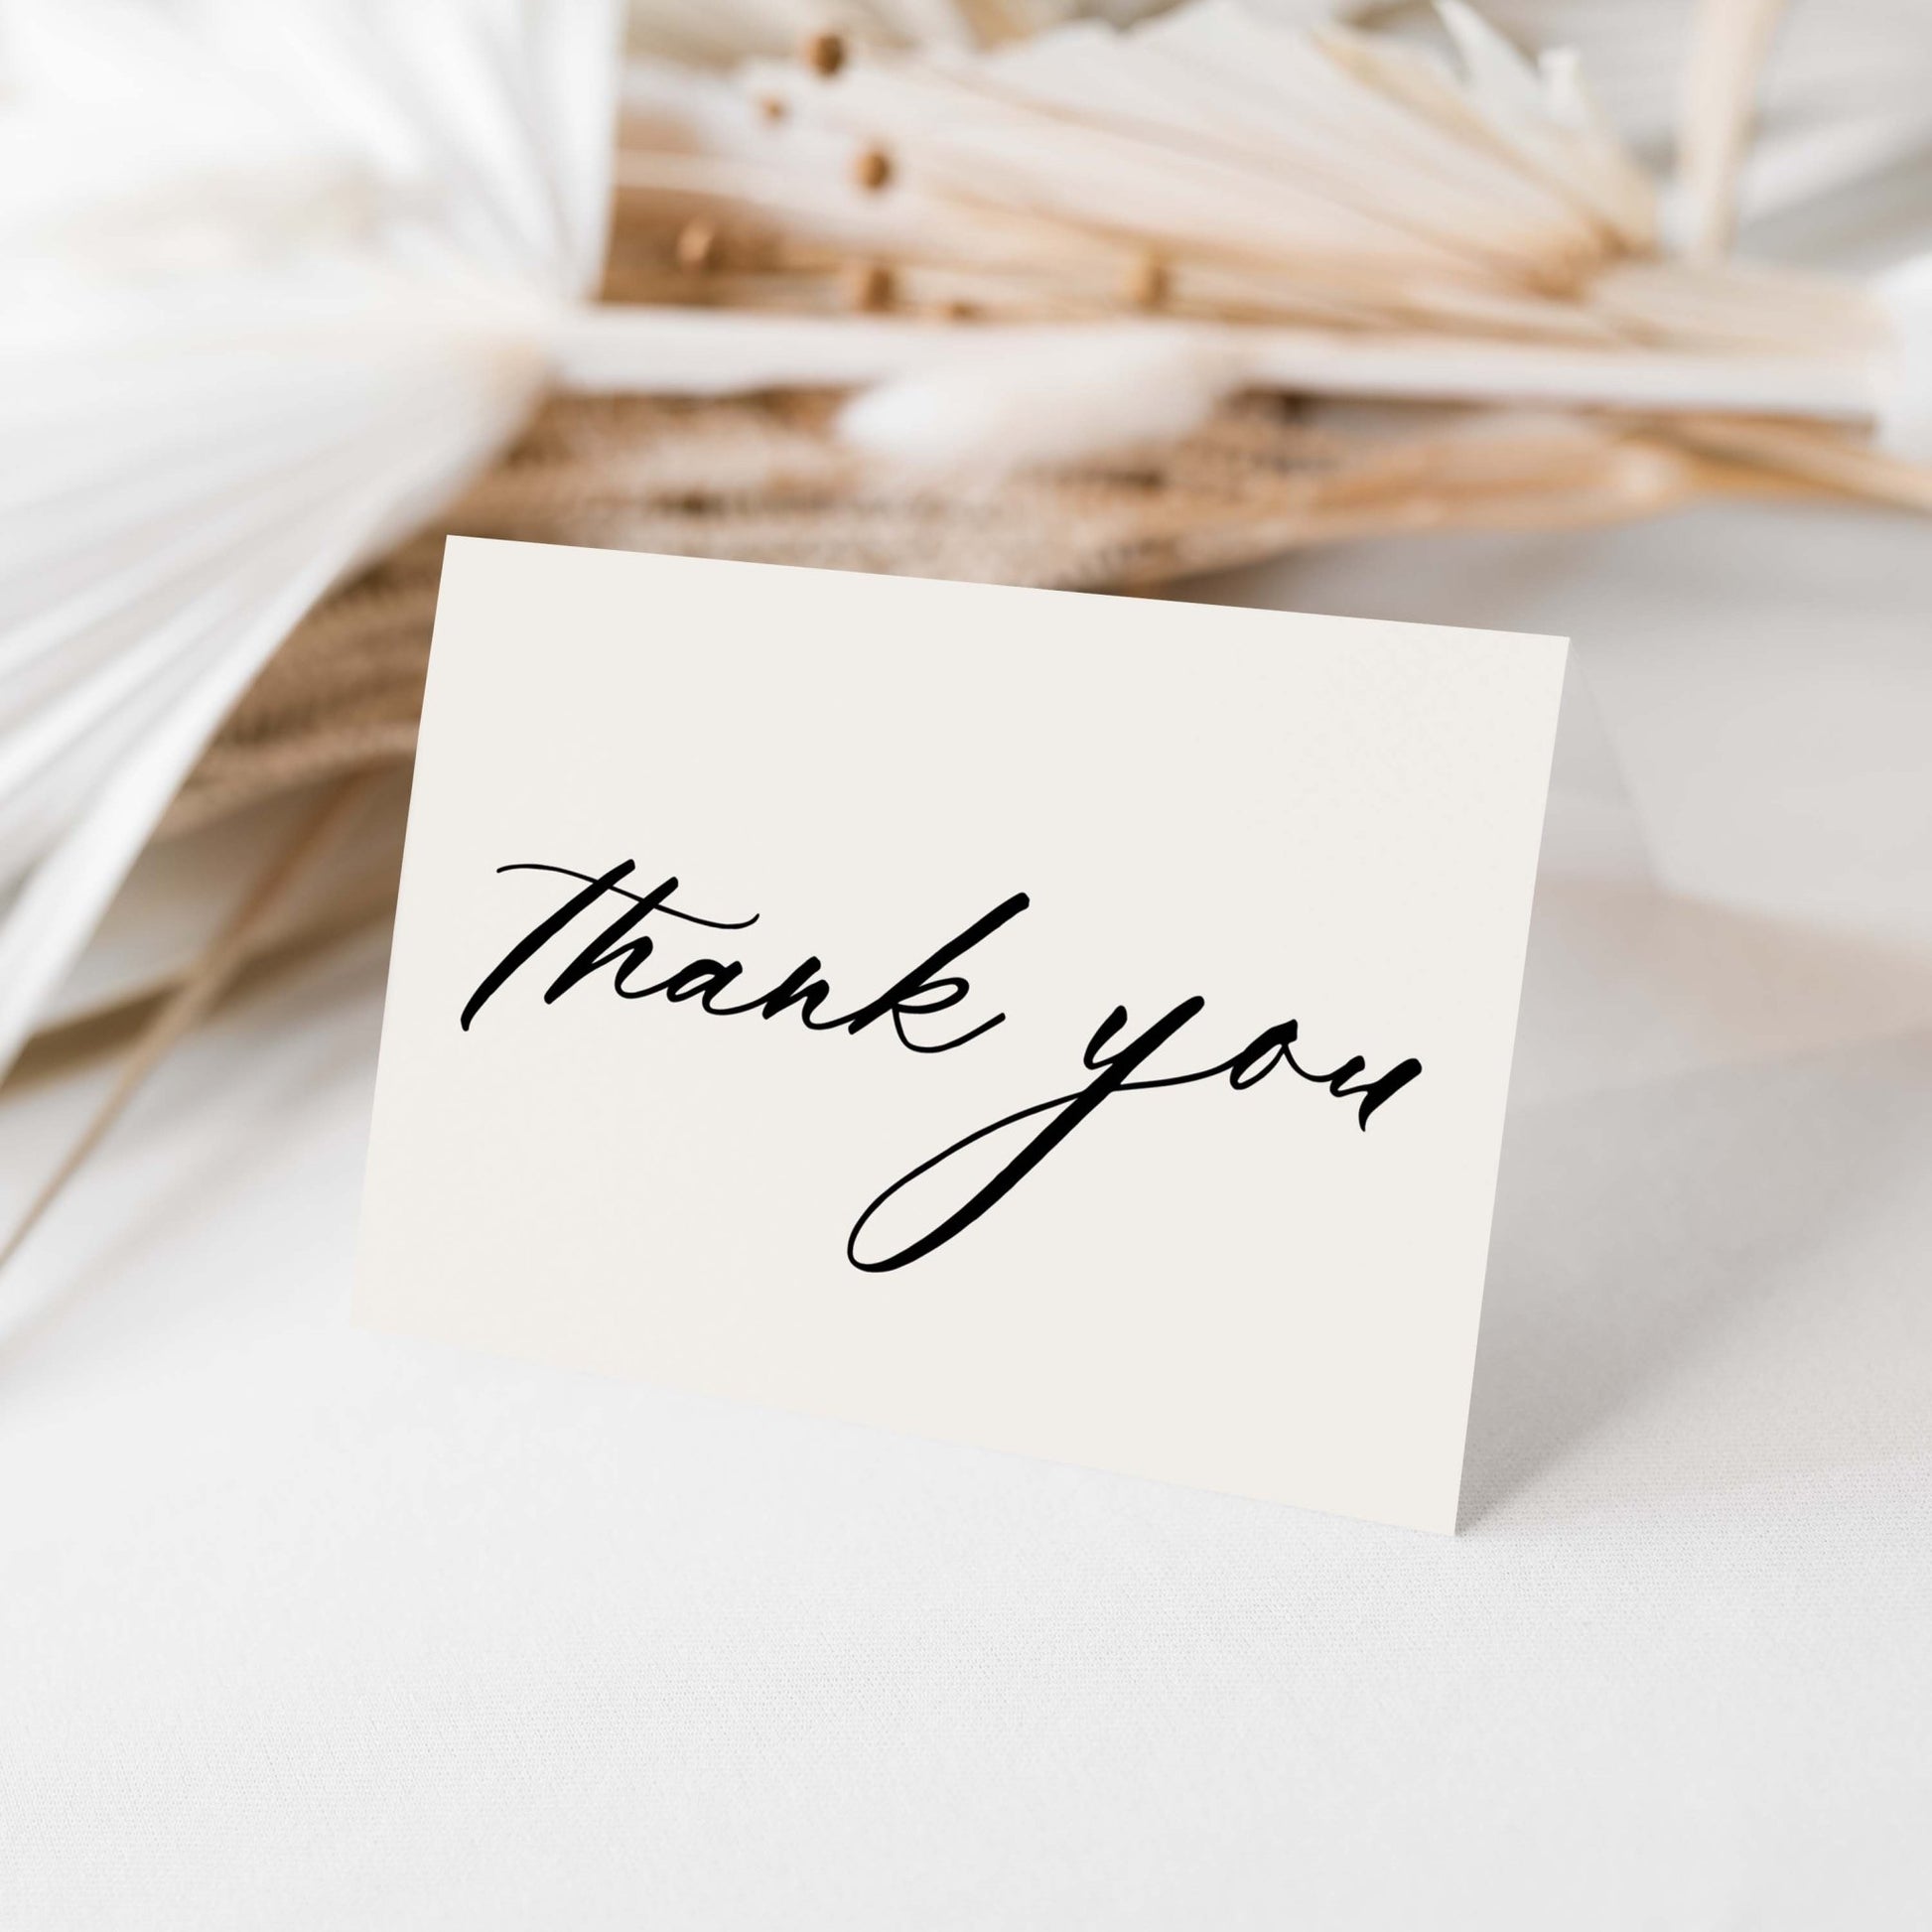 Thank You Note Cards - 4x6 - Simple Script, Tan